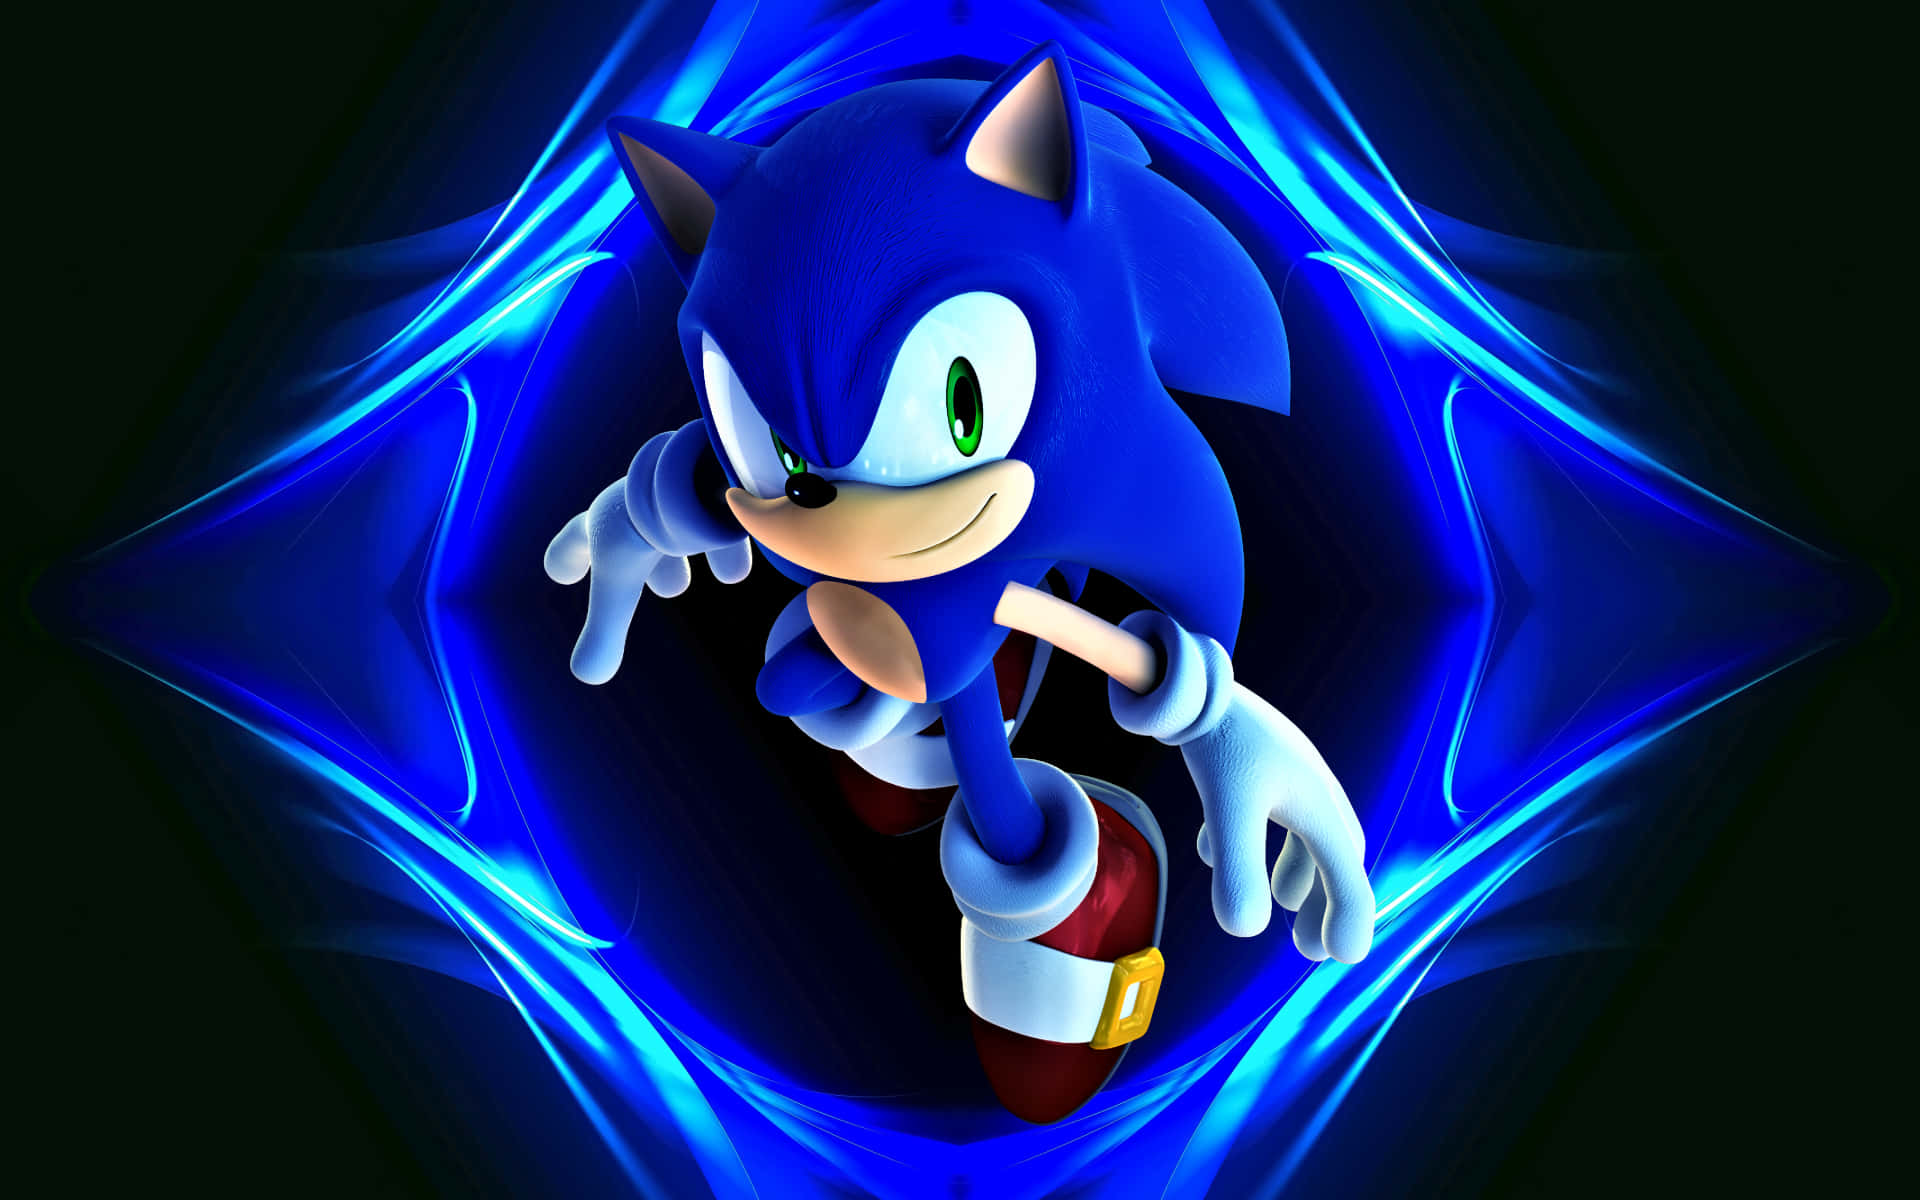 A 4K Rendition of the Iconic Sonic the Hedgehog Wallpaper